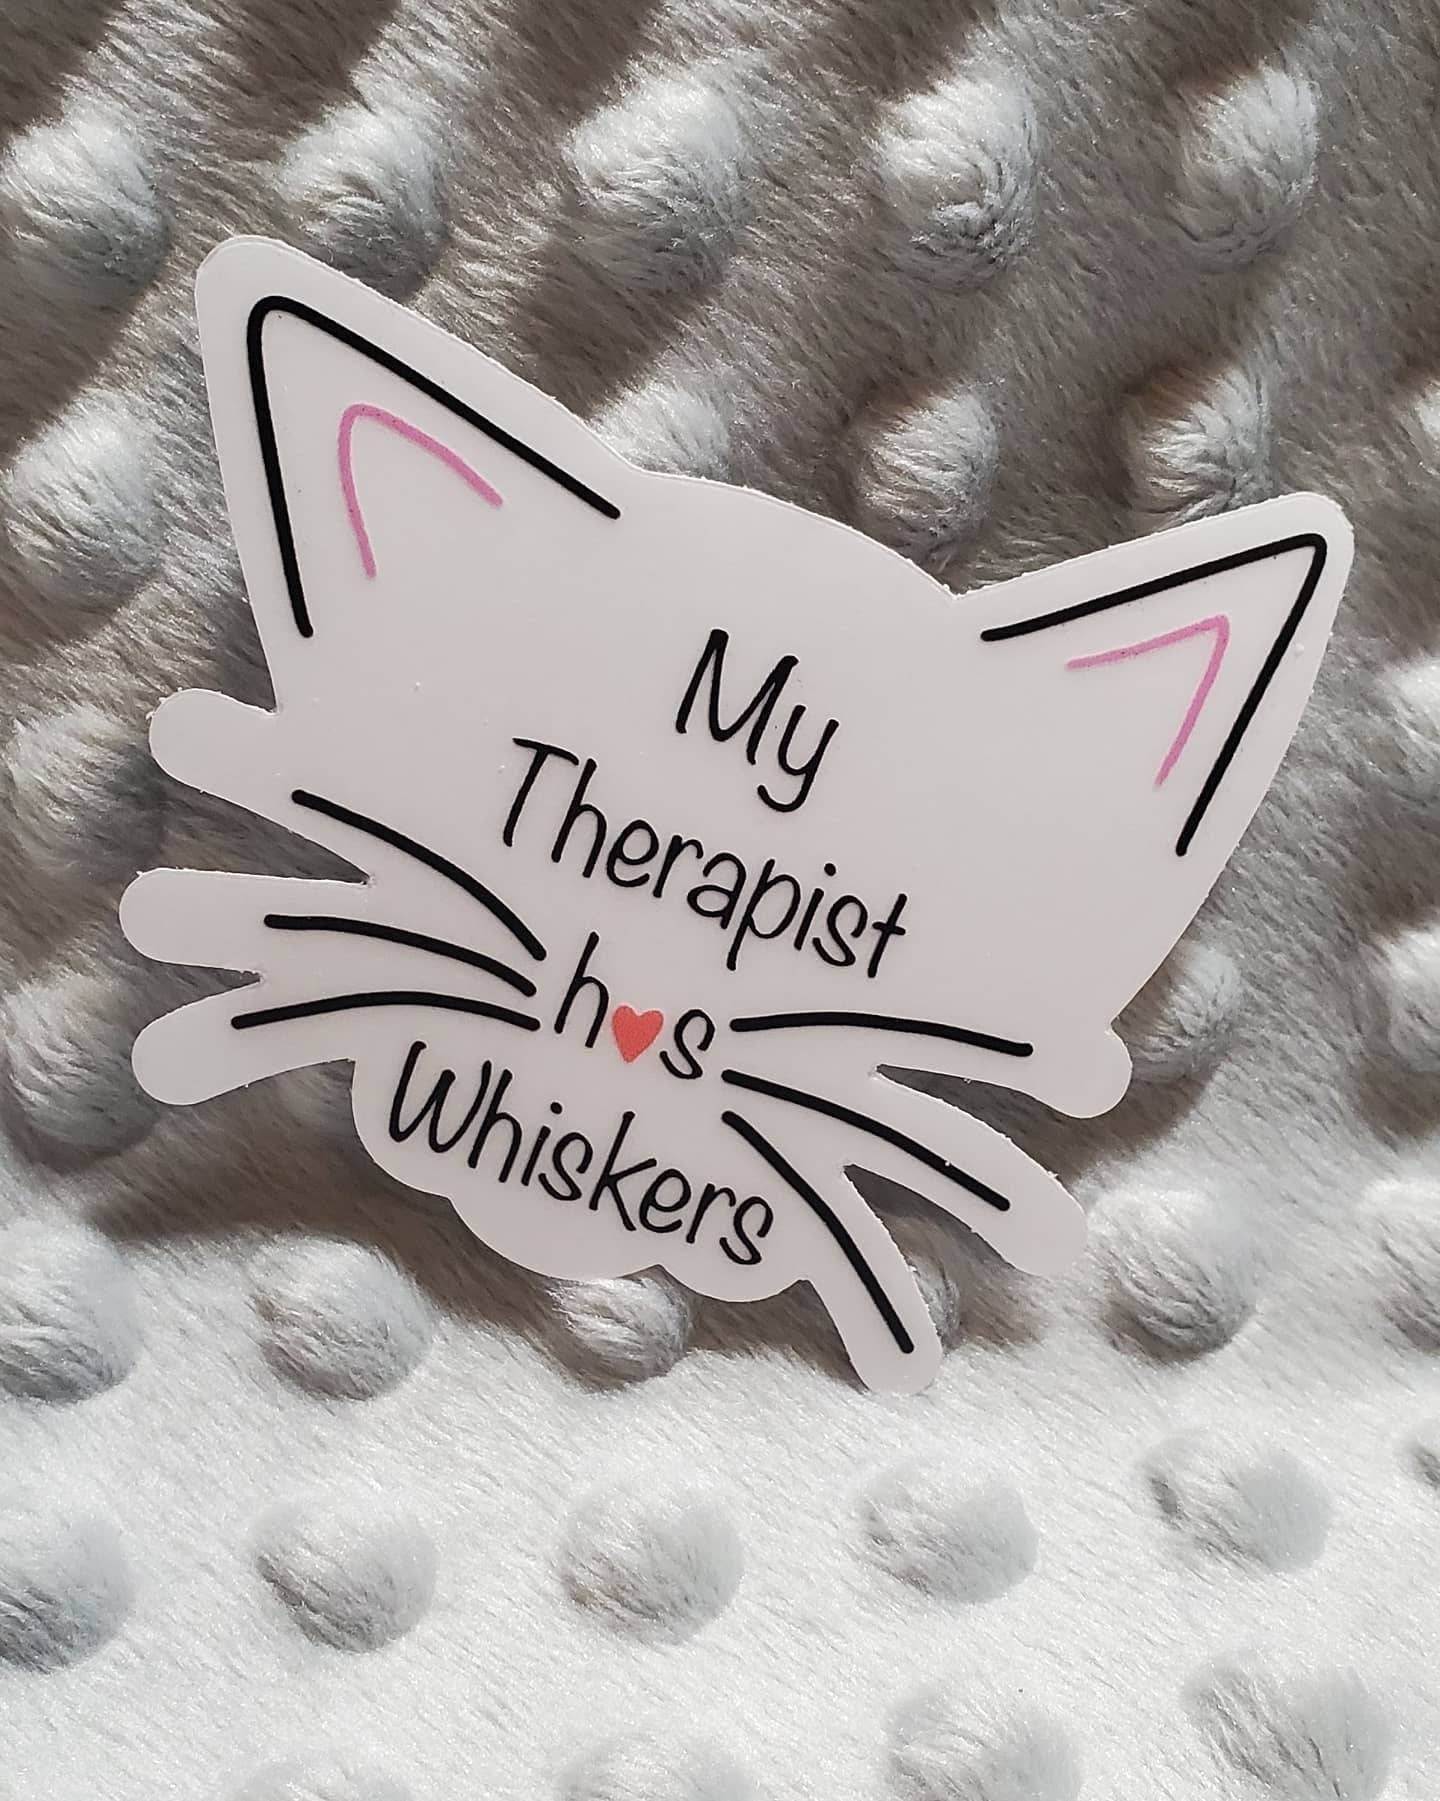 My therapist has whiskers clear sticker-cat sticker-clear sticker-my cat is my therapist-clear cat sticker-cat whiskers